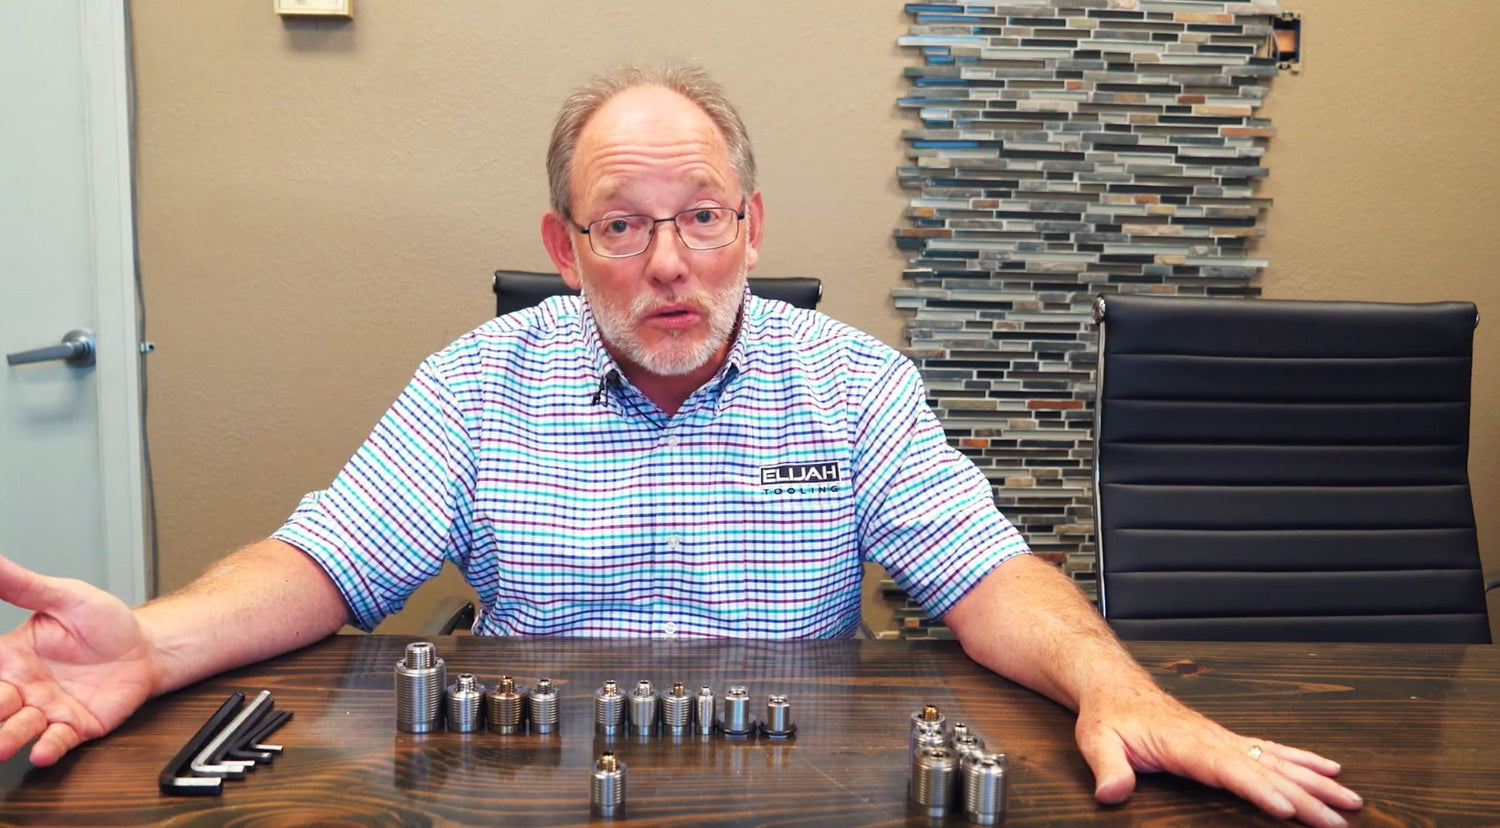 Rick Explains the Different CNC Workholding Invert-a-bolt Fastener Sizes and Functions